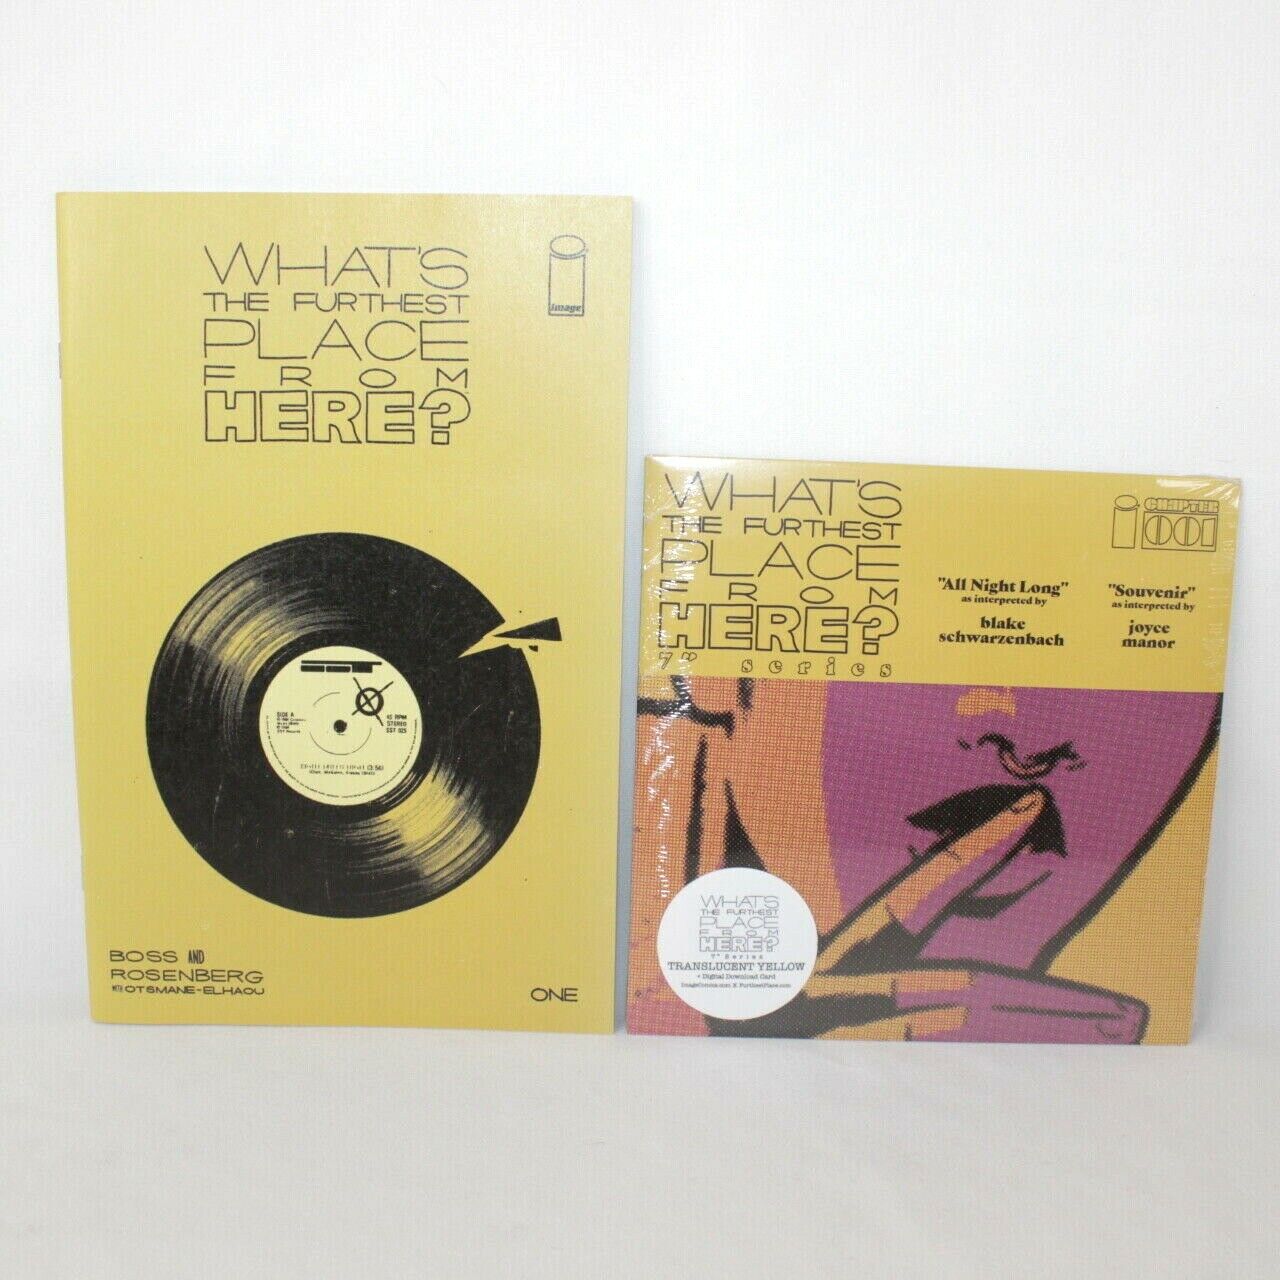 What's the Furthest Place From Here #1 Deluxe with 7" Yellow Vinyl 2021 Image VF